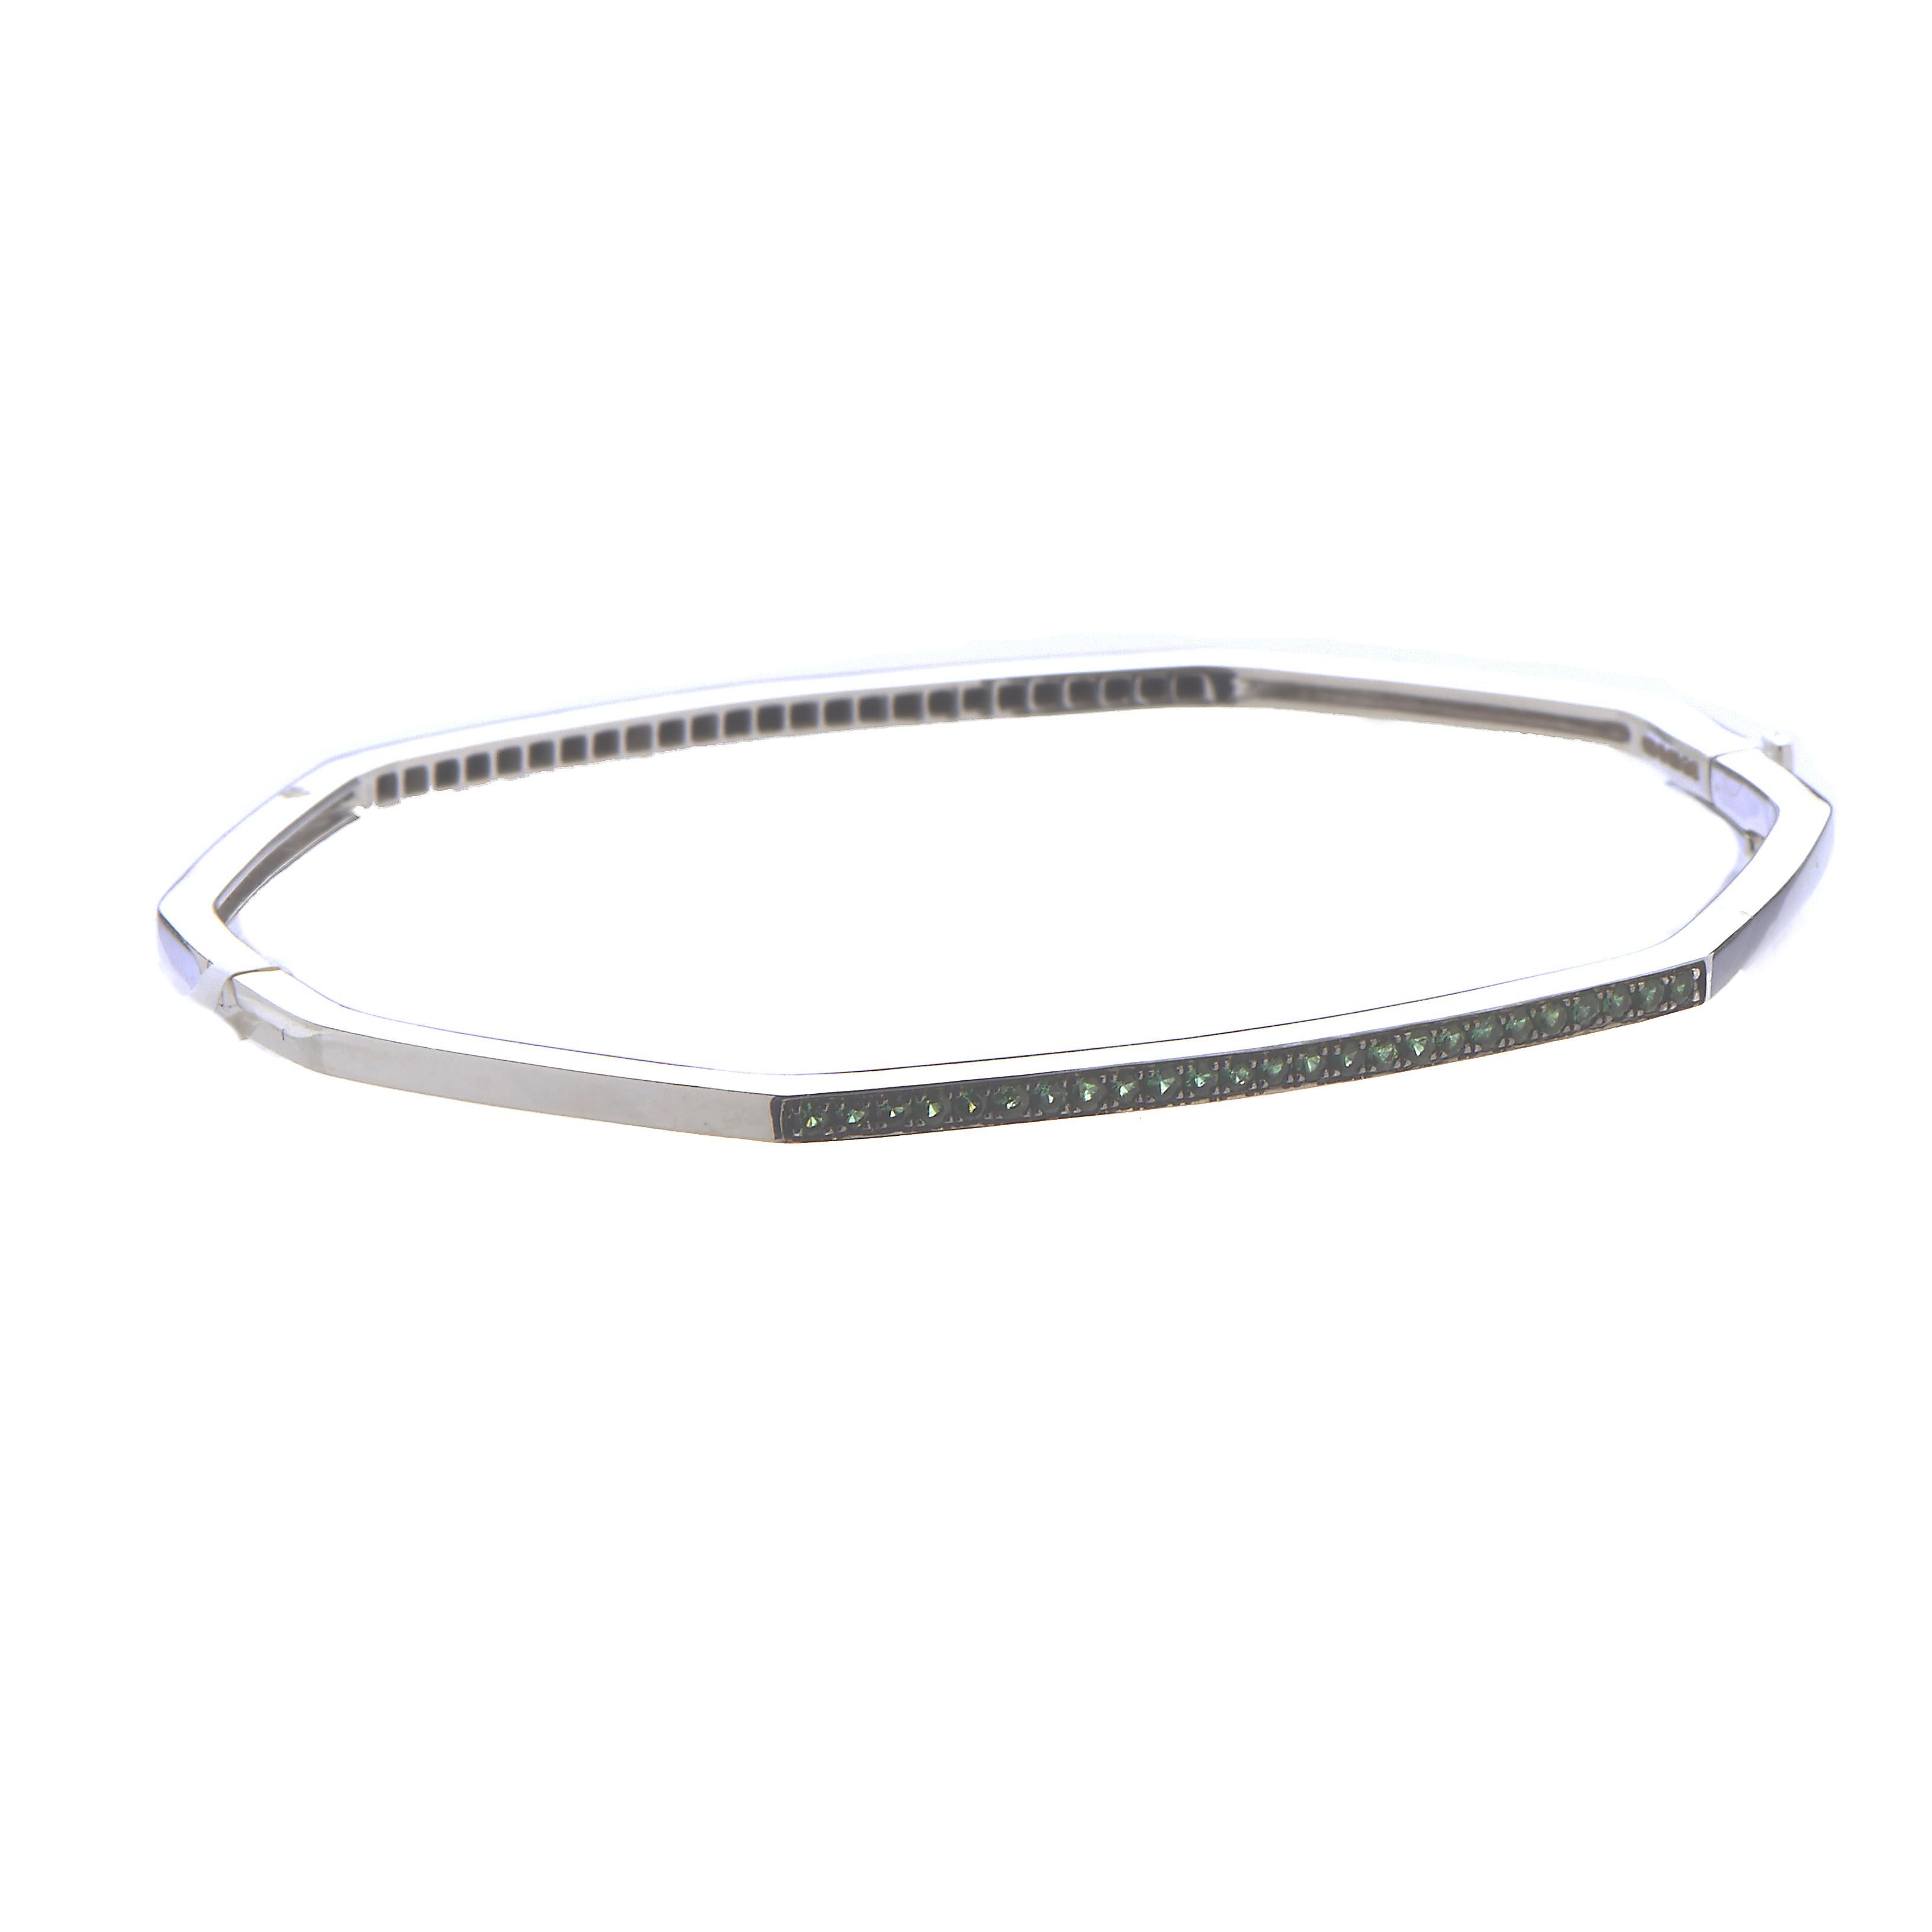 Exuding remarkable elegance and sophisticated simplicity as instantly recognizable traits of the Deco collection, this outstanding bangle from Stephen Webster is made of prestigious 18K white gold and lined with a tasteful blend of black diamonds